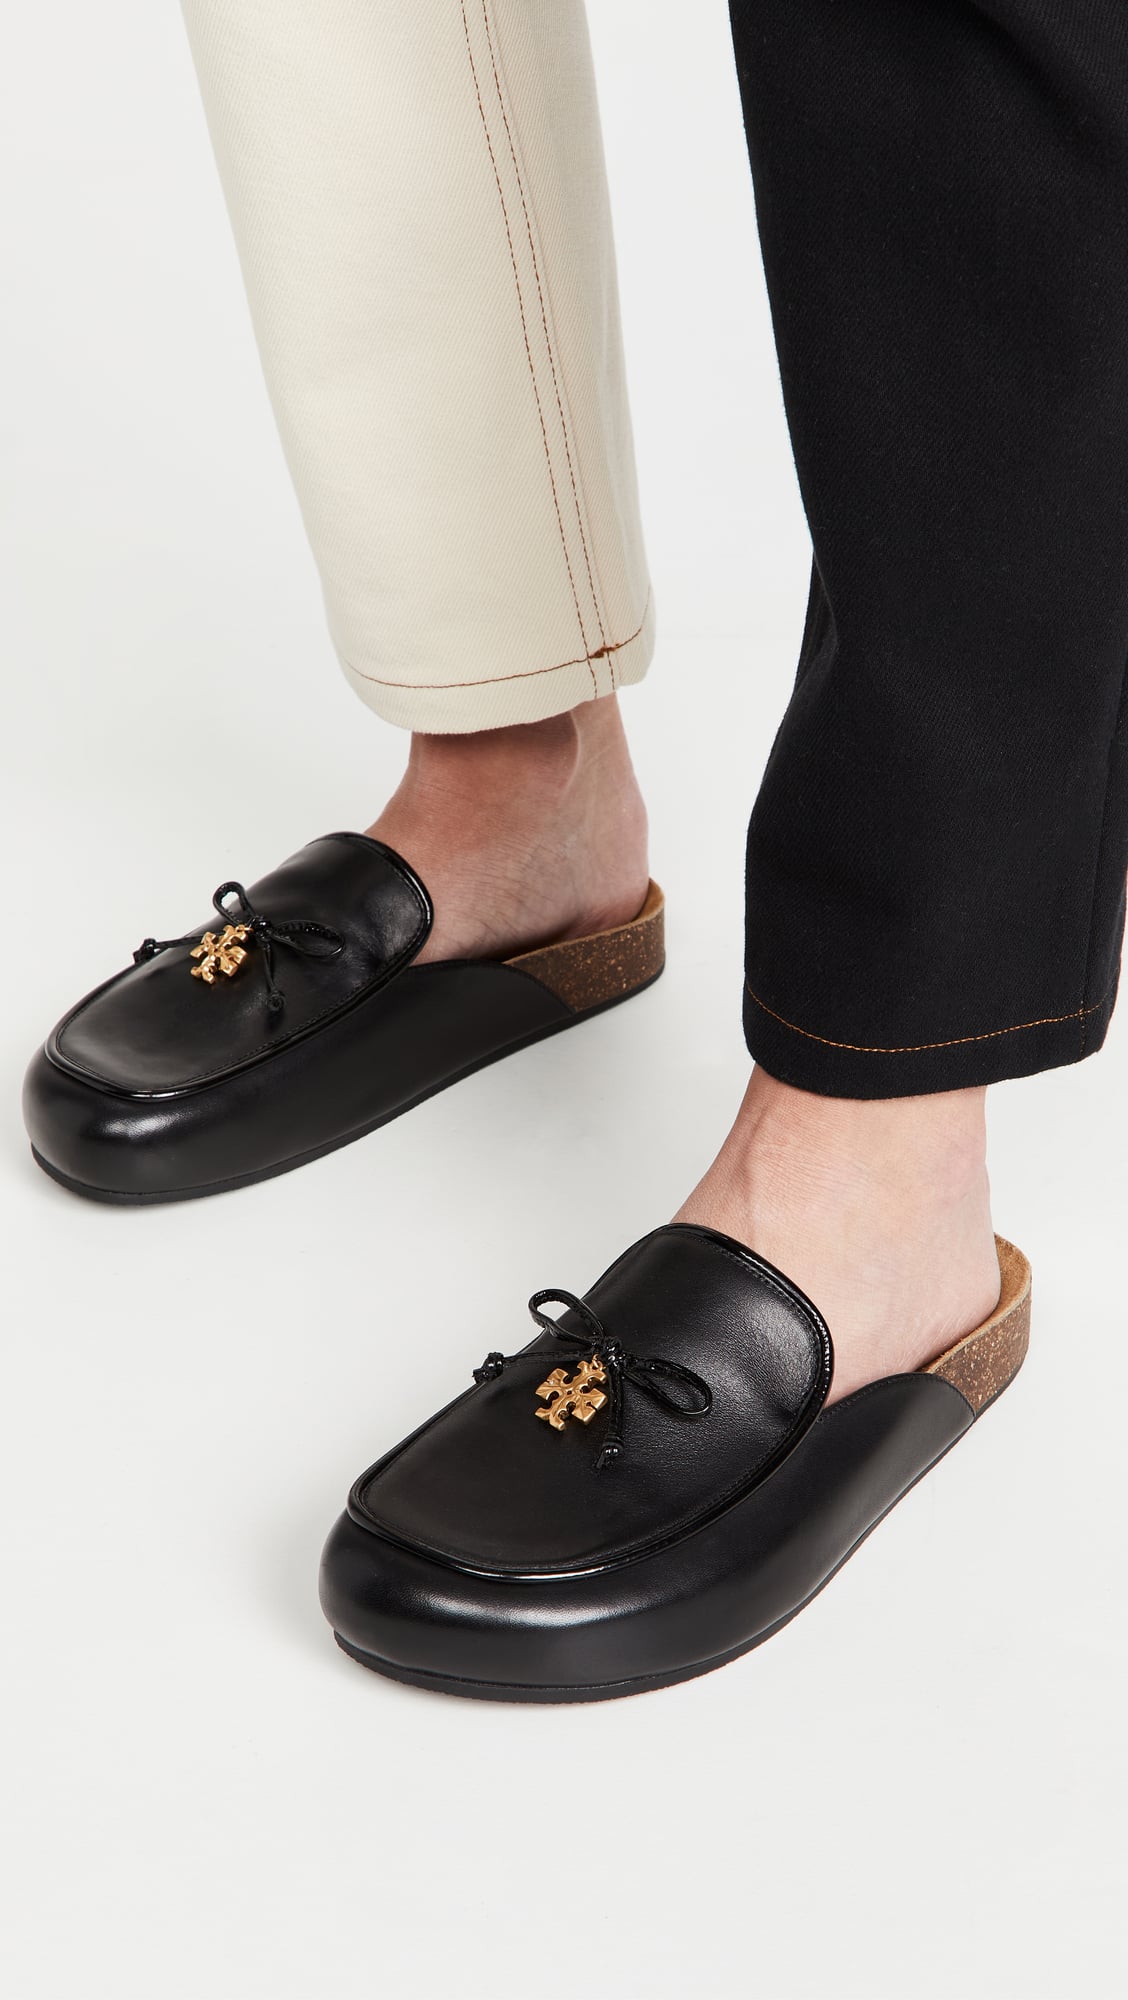 For Everyday: Tory Burch Tory Charm Mules | Comfy, Cozy Clogs Are the Shoe  We Can't Wait to Wear This Fall | POPSUGAR Fashion Photo 10